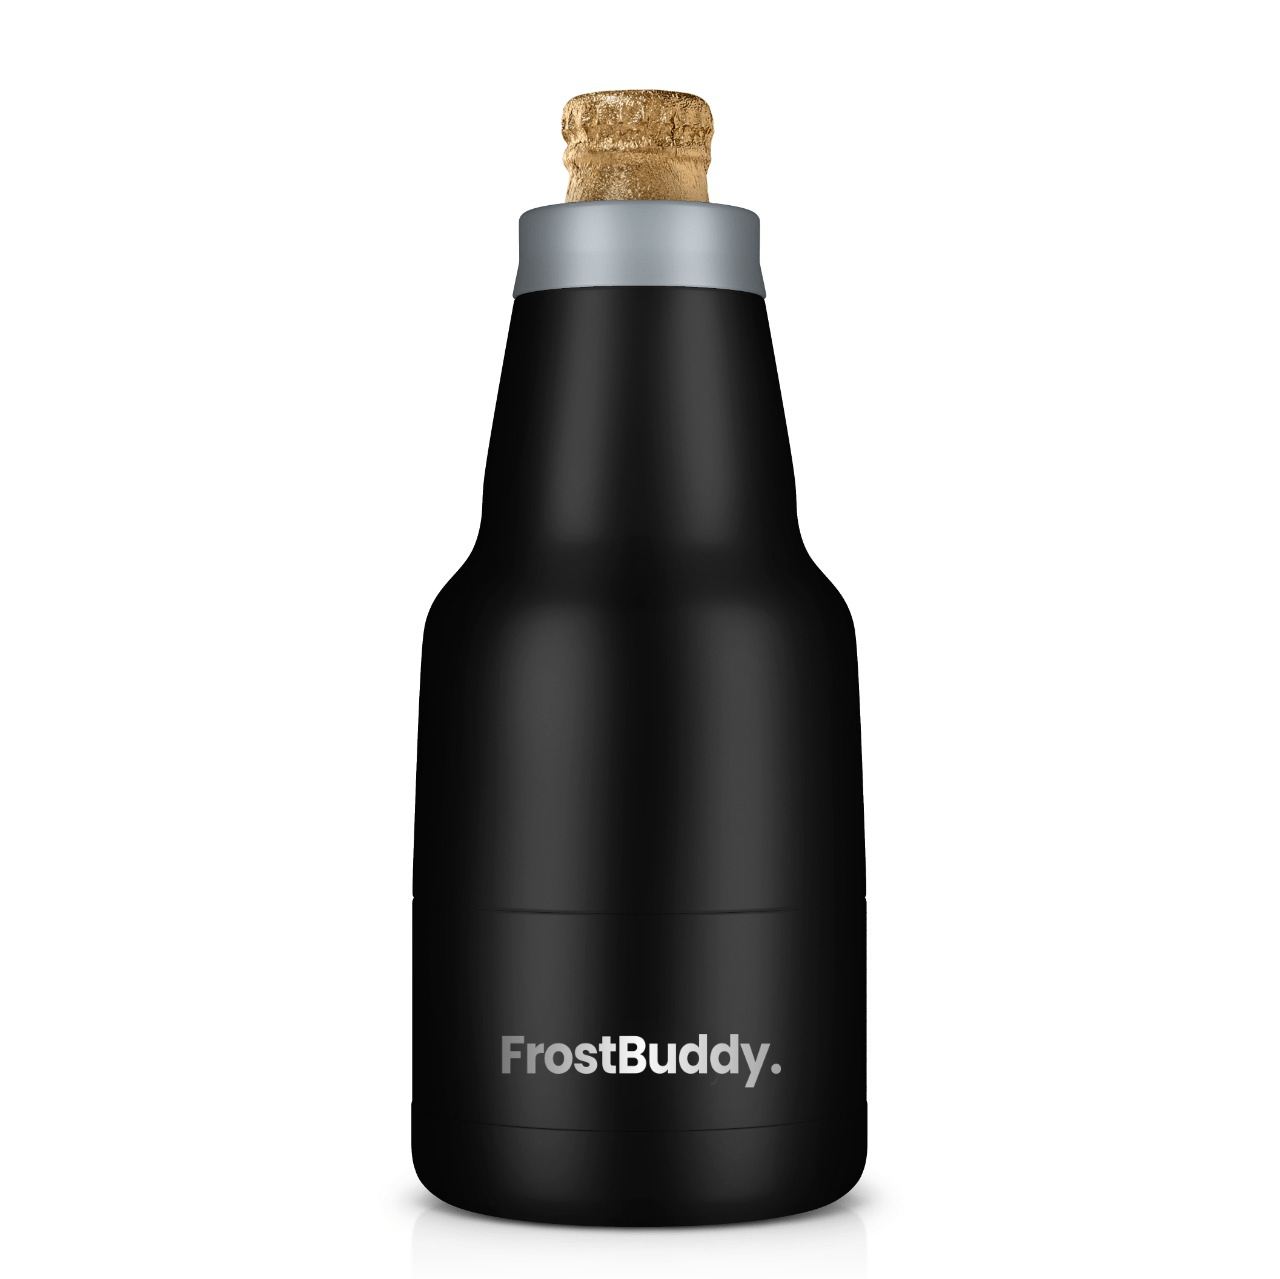 Chubby Buddy | Modelo Bottle Cooler - Keep Your 12oz Modelo Bottles Cold for 12+ Hours | Frost Buddy